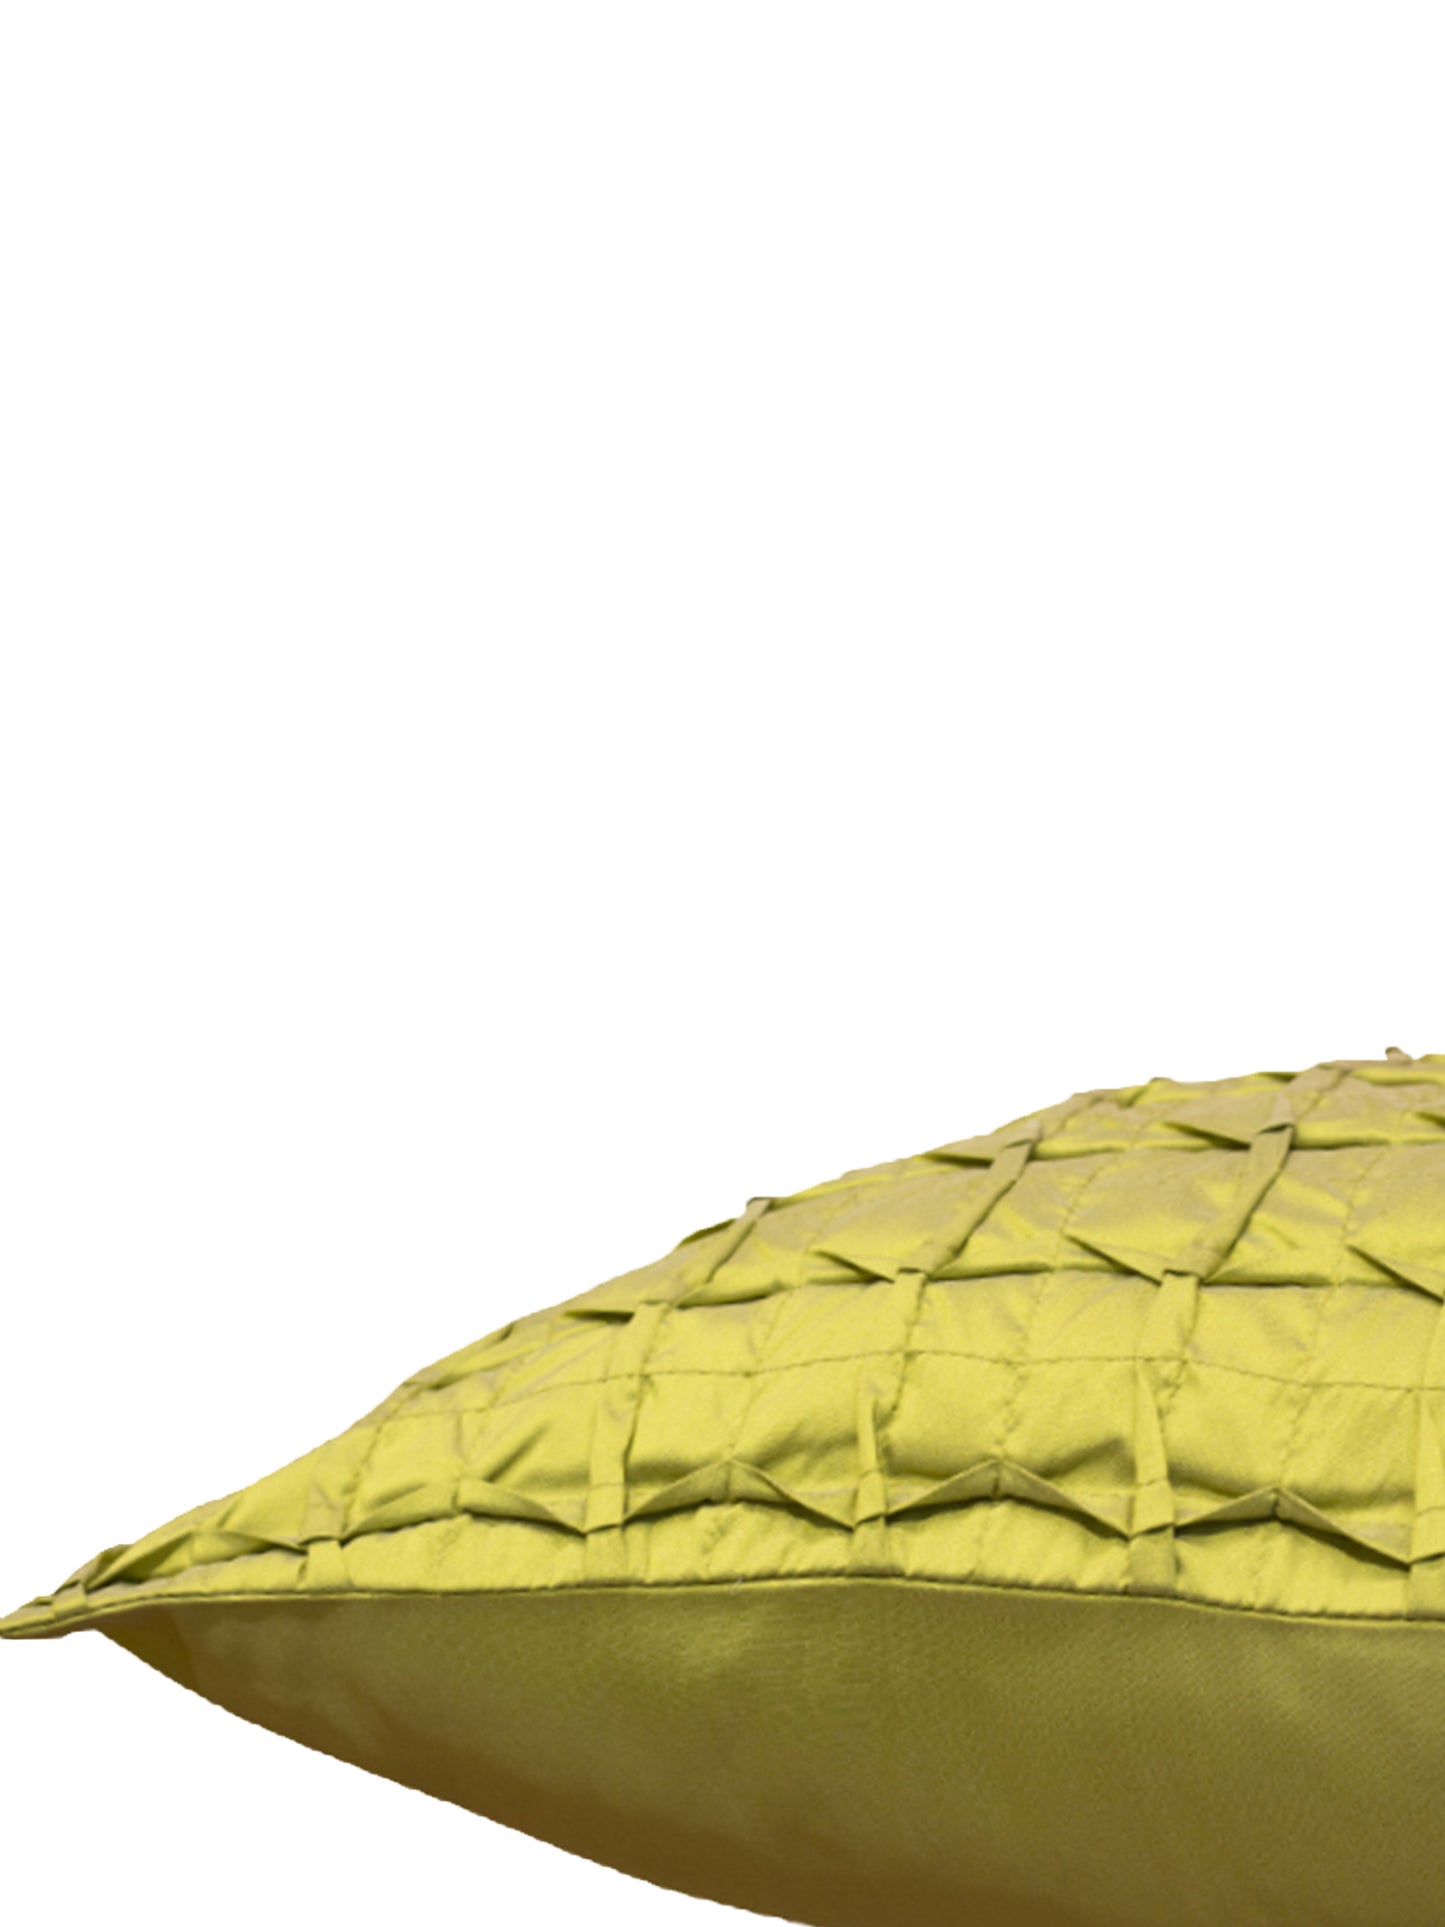 Cushion Cover Set of 3 100% Polyester Yellow And Green - "16 X 16"